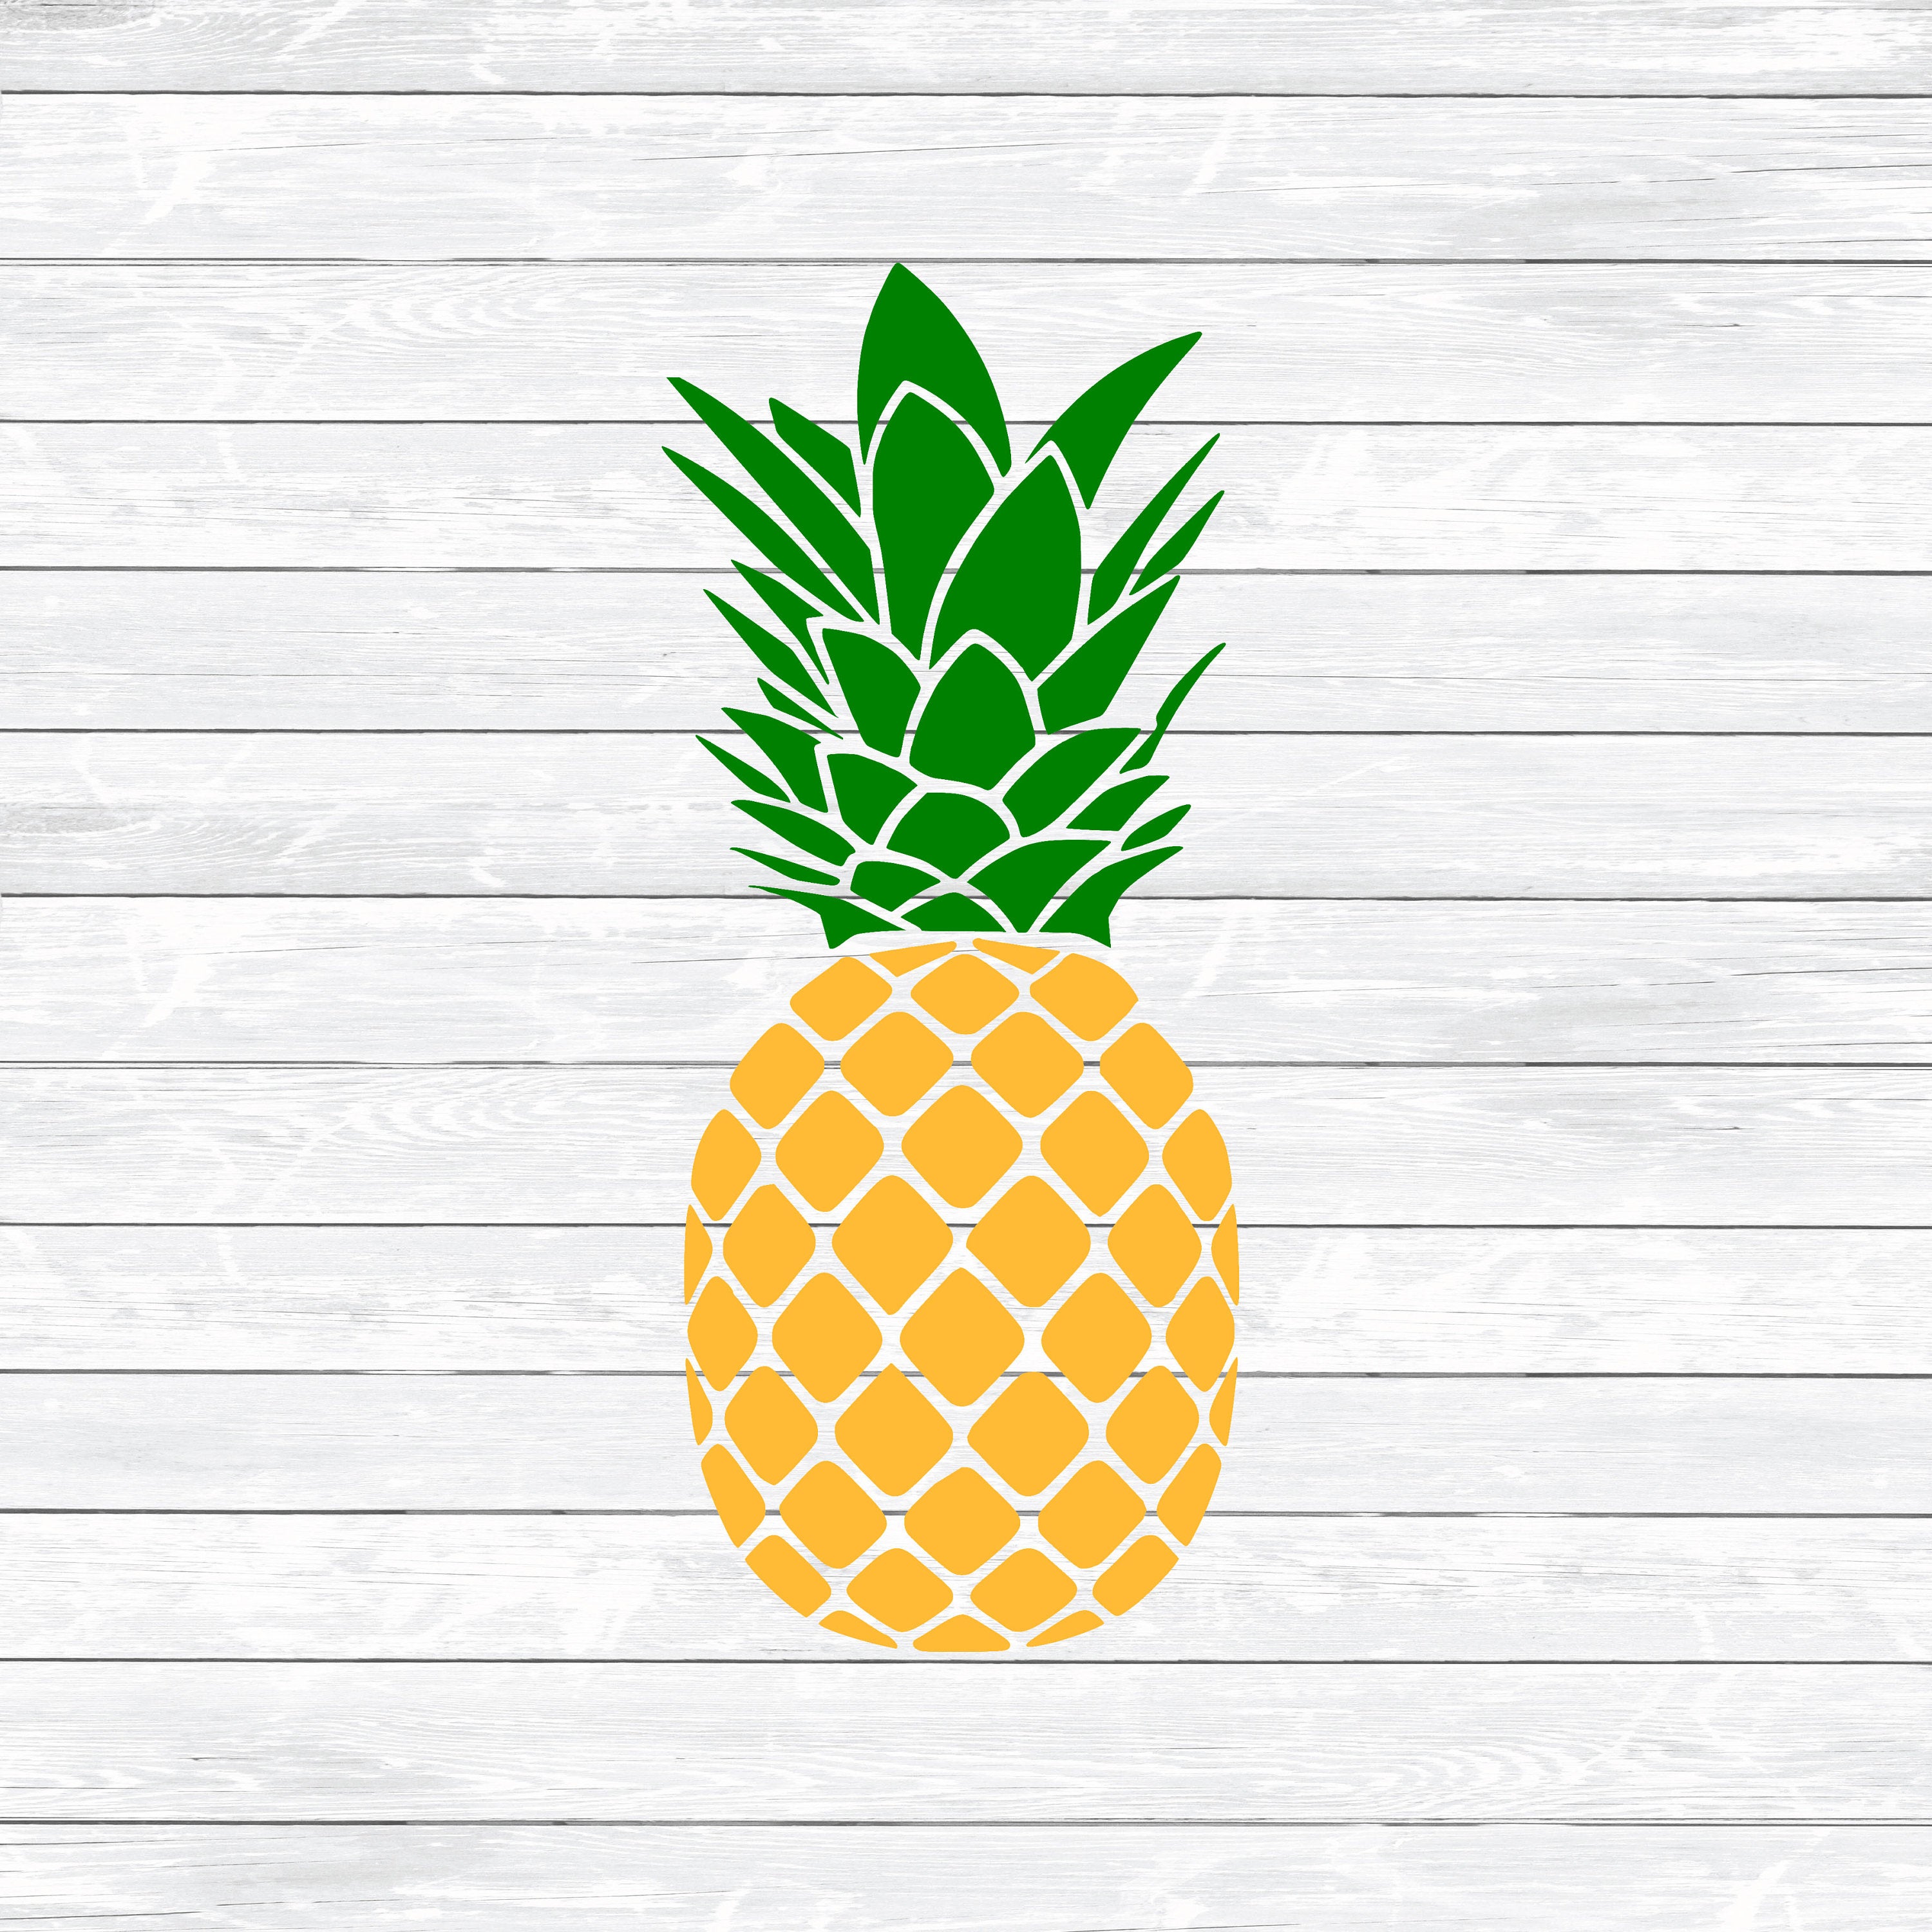 Pineapple clipart easy, Pineapple easy Transparent FREE for download on